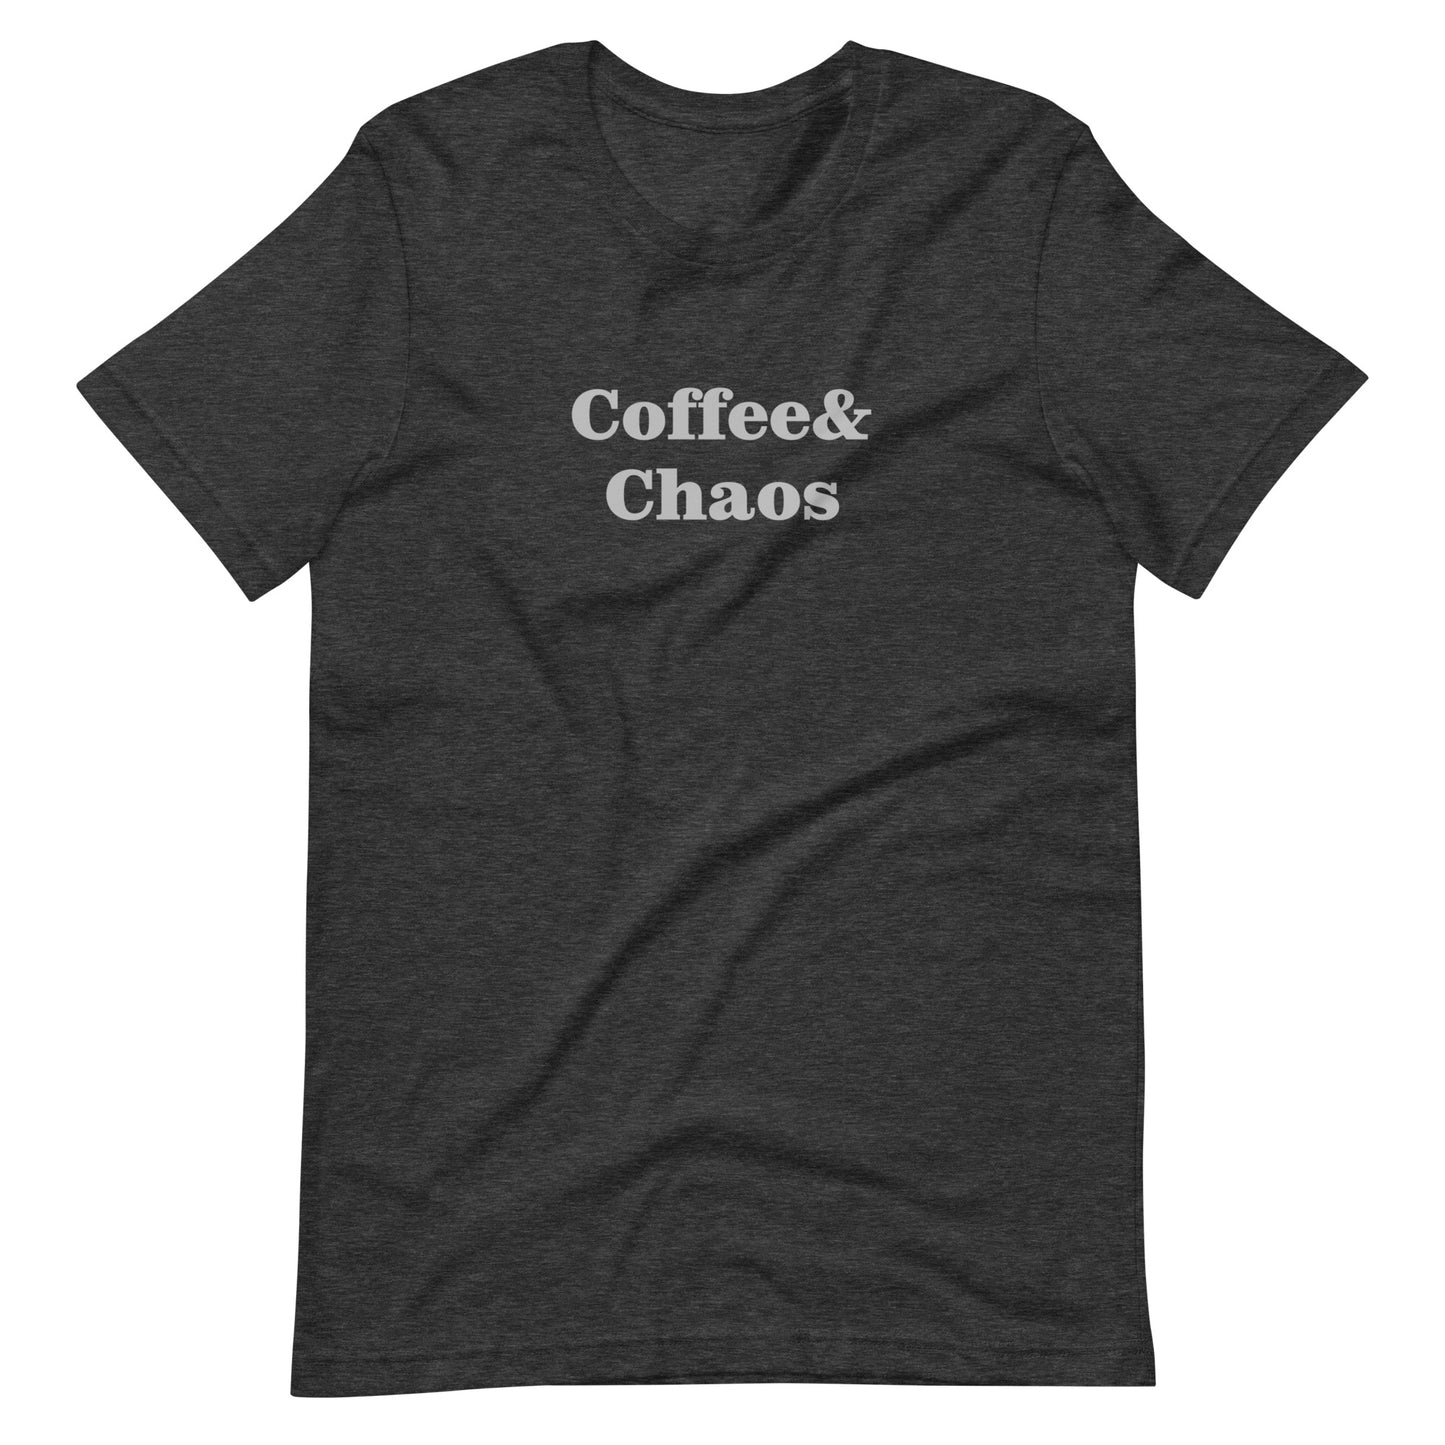 Unisex t-shirt in Coffee & Chaos